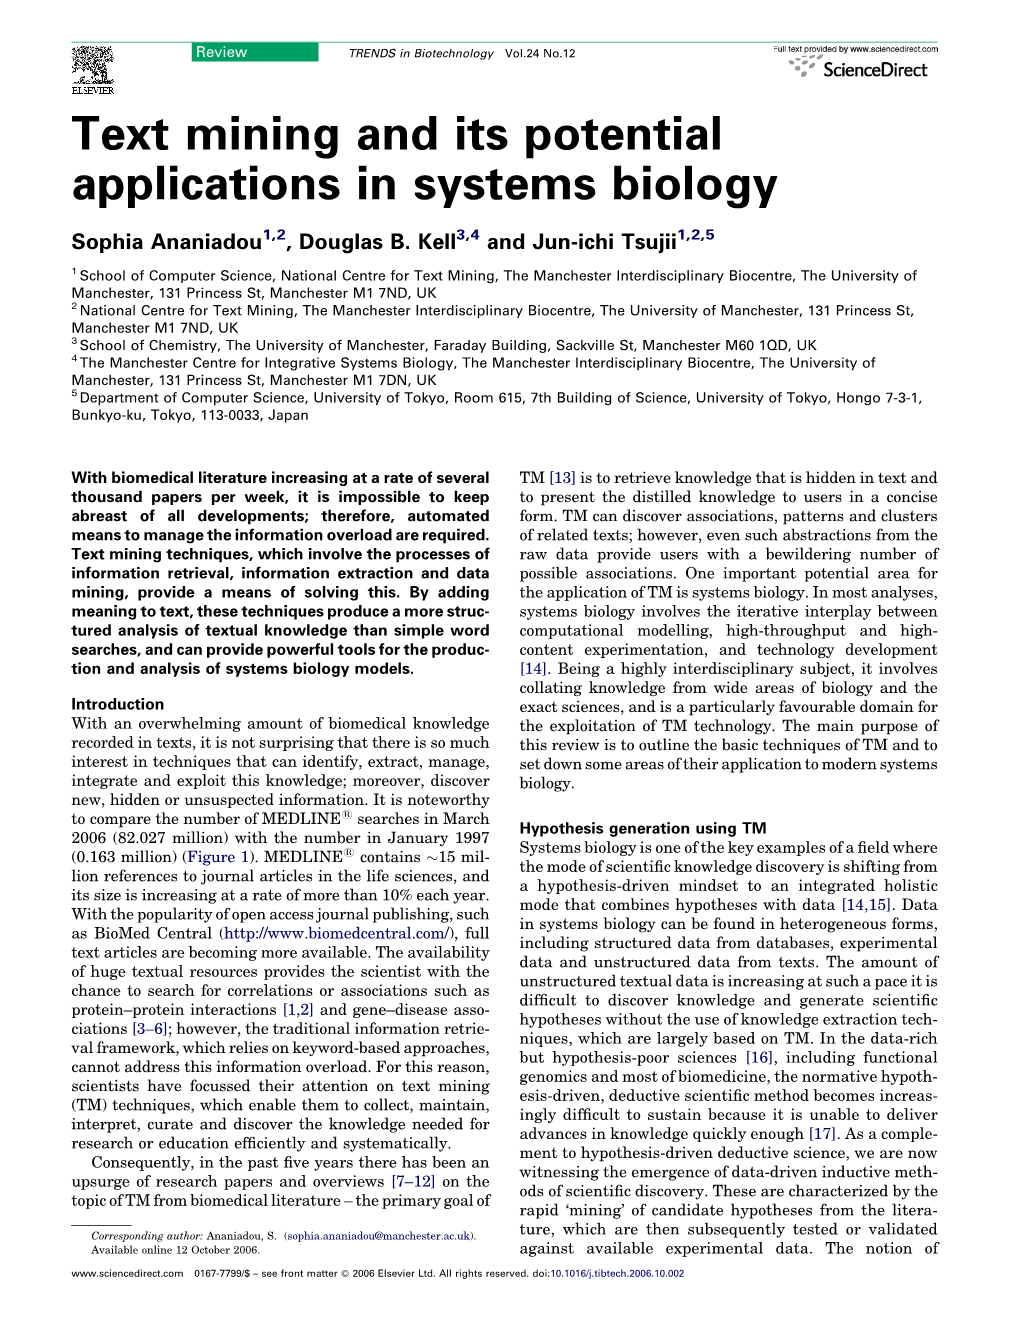 Text Mining and Its Potential Applications in Systems Biology